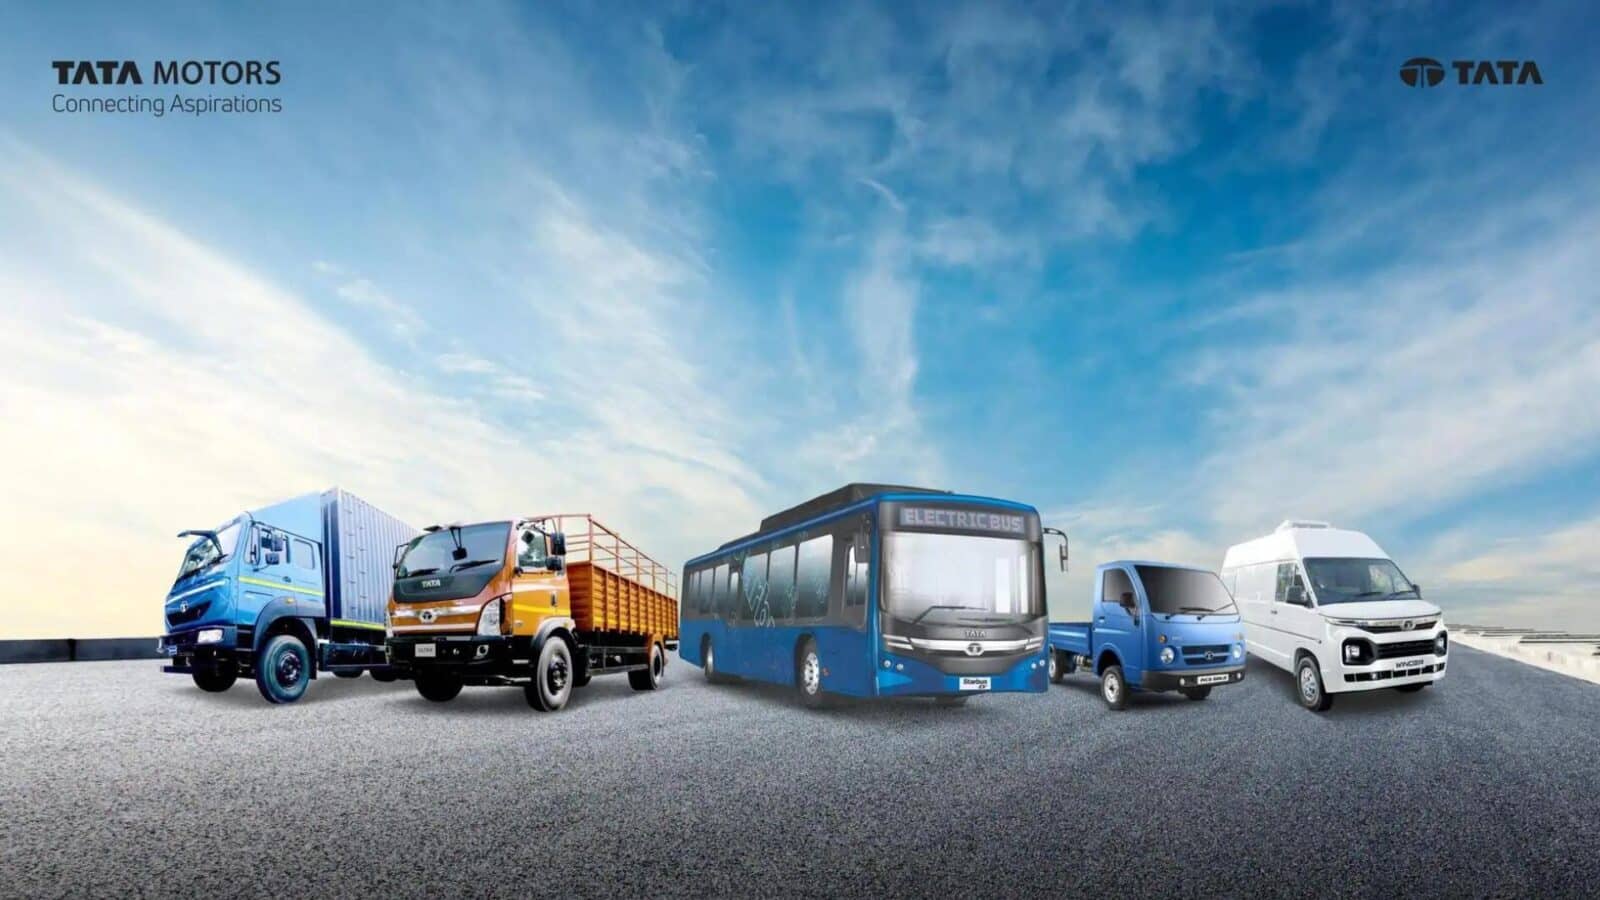 Tata Motors To Split Passenger And Commercial Vehicle Businesses Into Two Separate Companies.